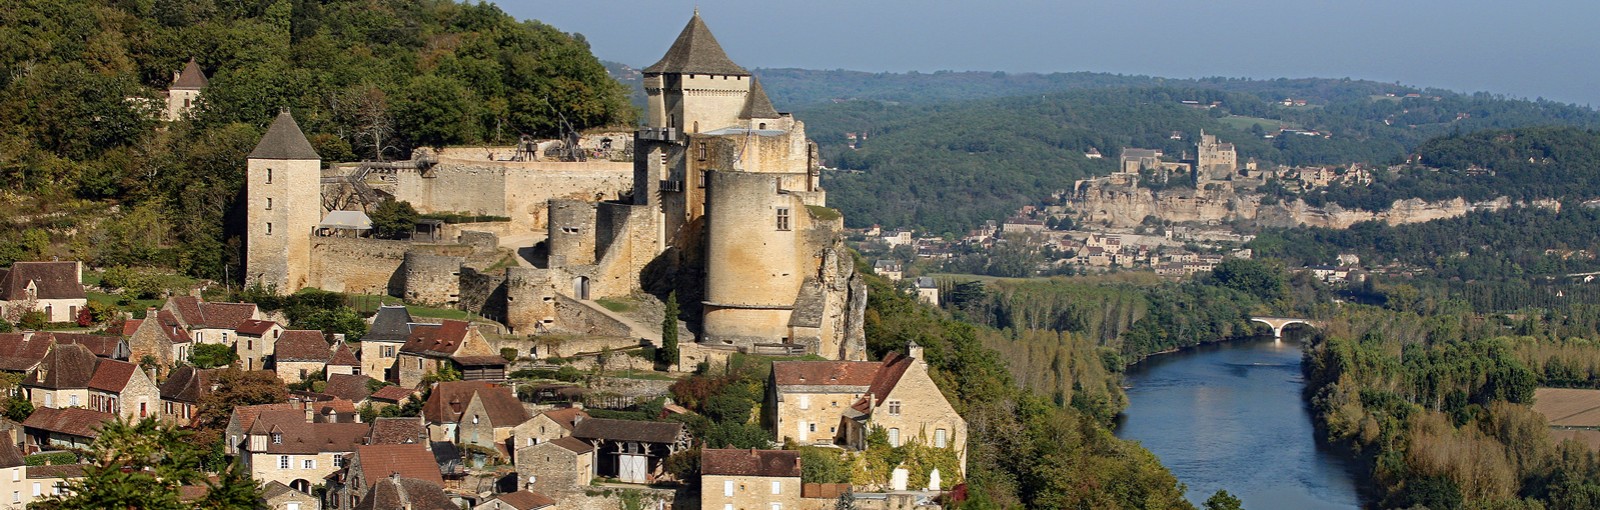 Tours Private day tours from Sarlat - Dordogne & Aquitaine - Regional tours